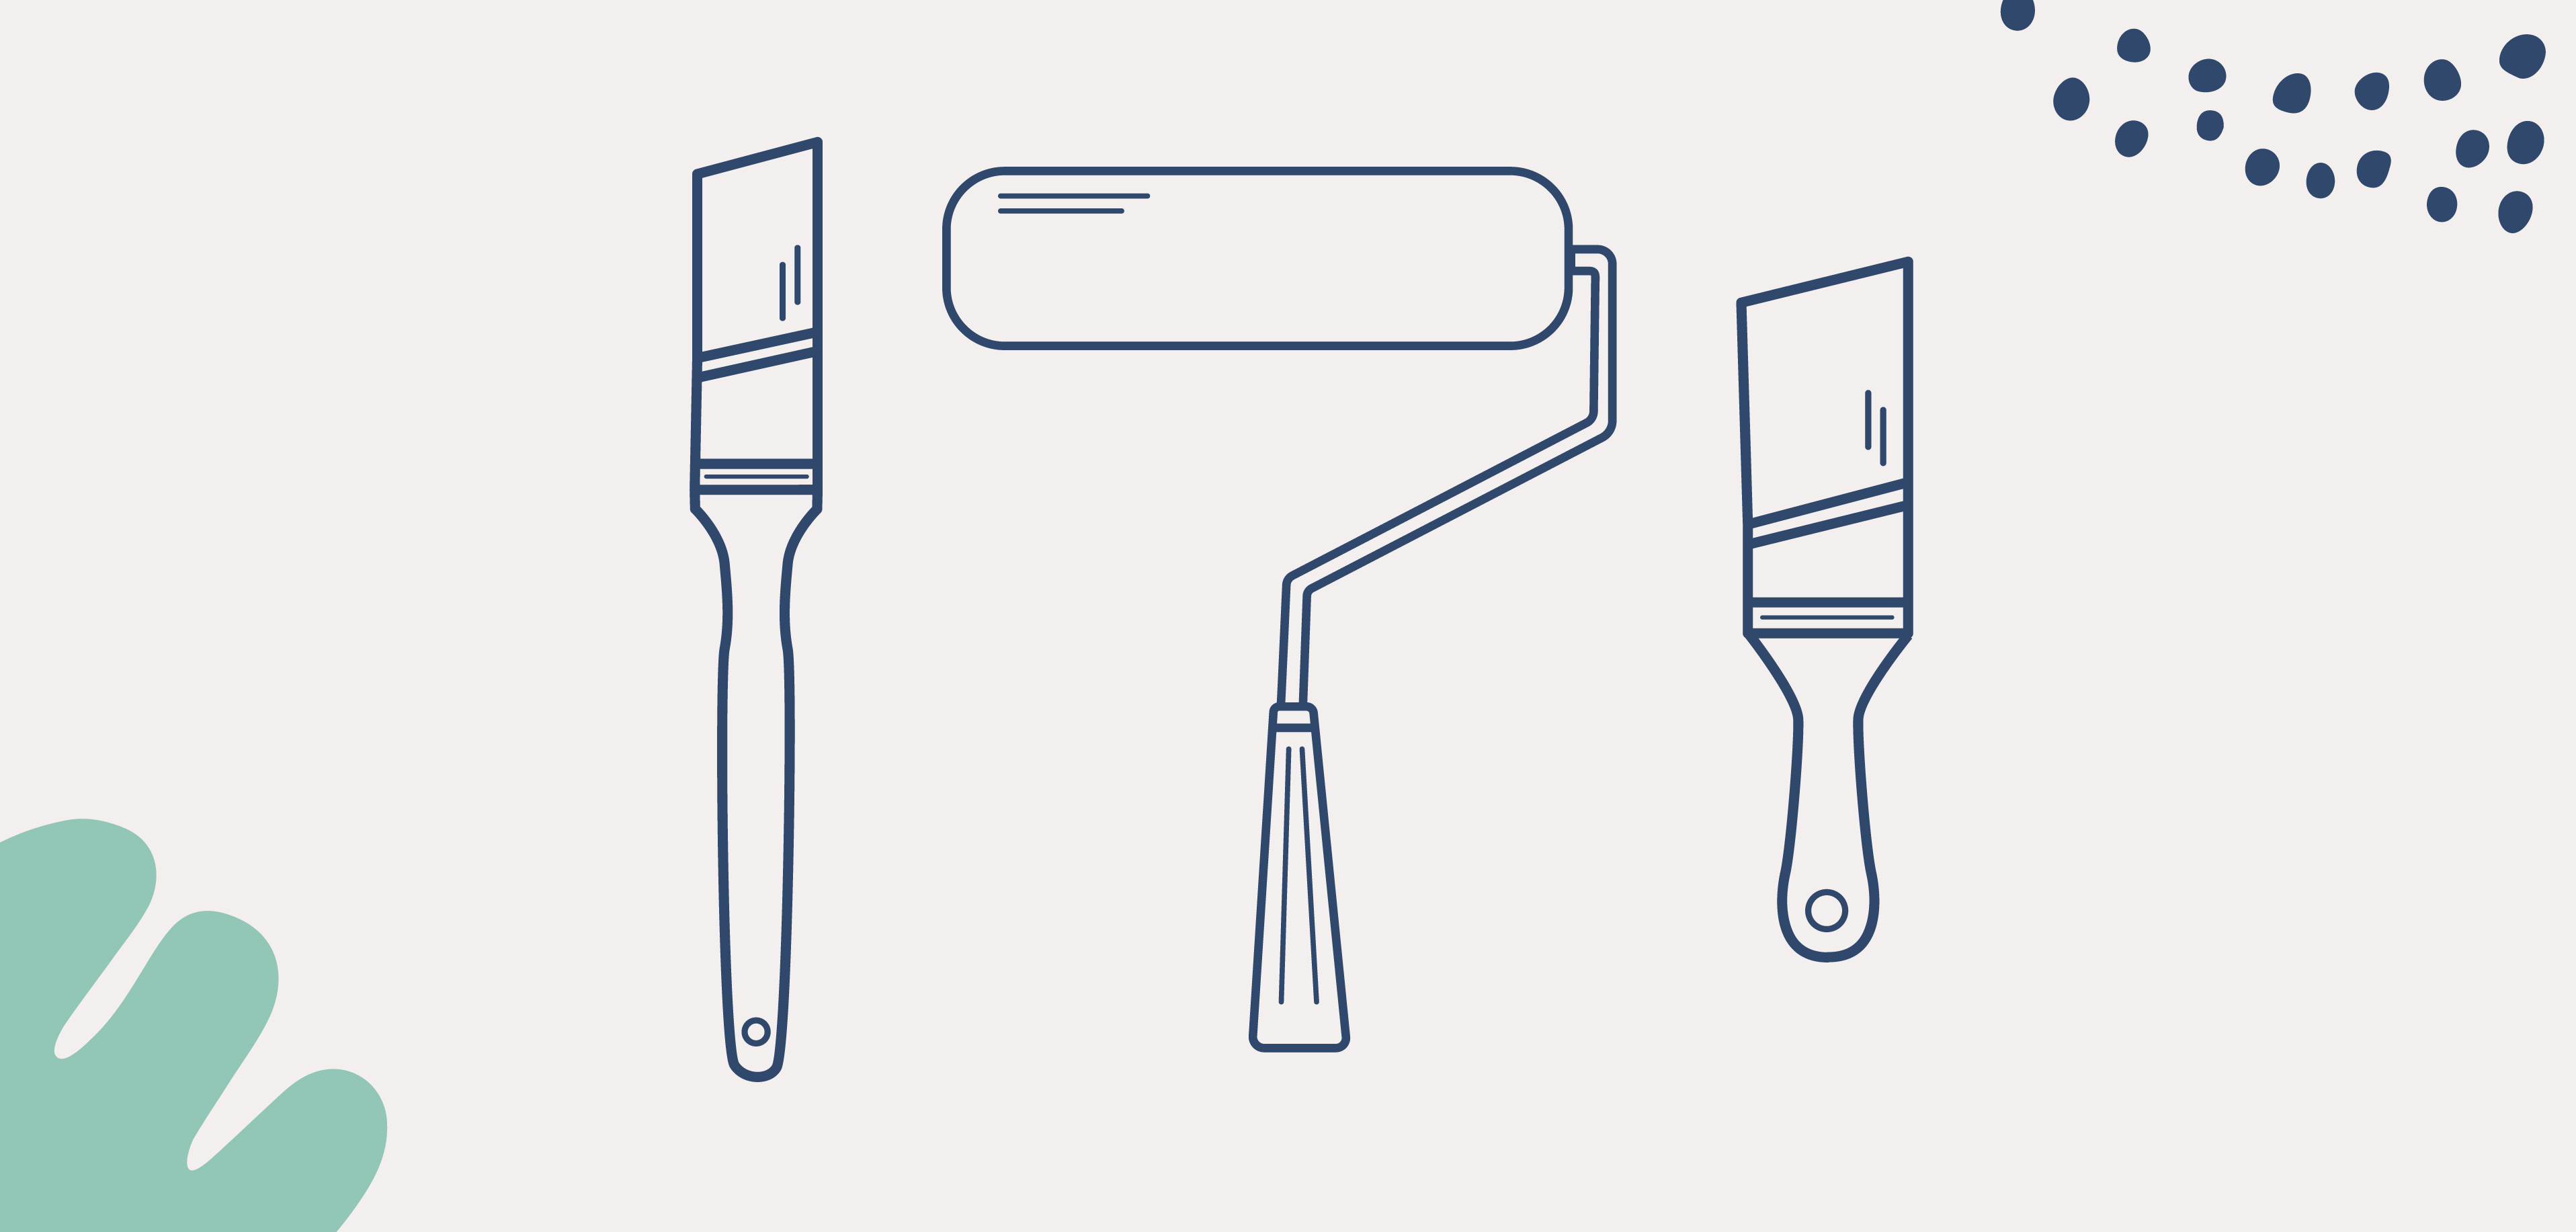 Illustration showing two paint brushes and a paint roller